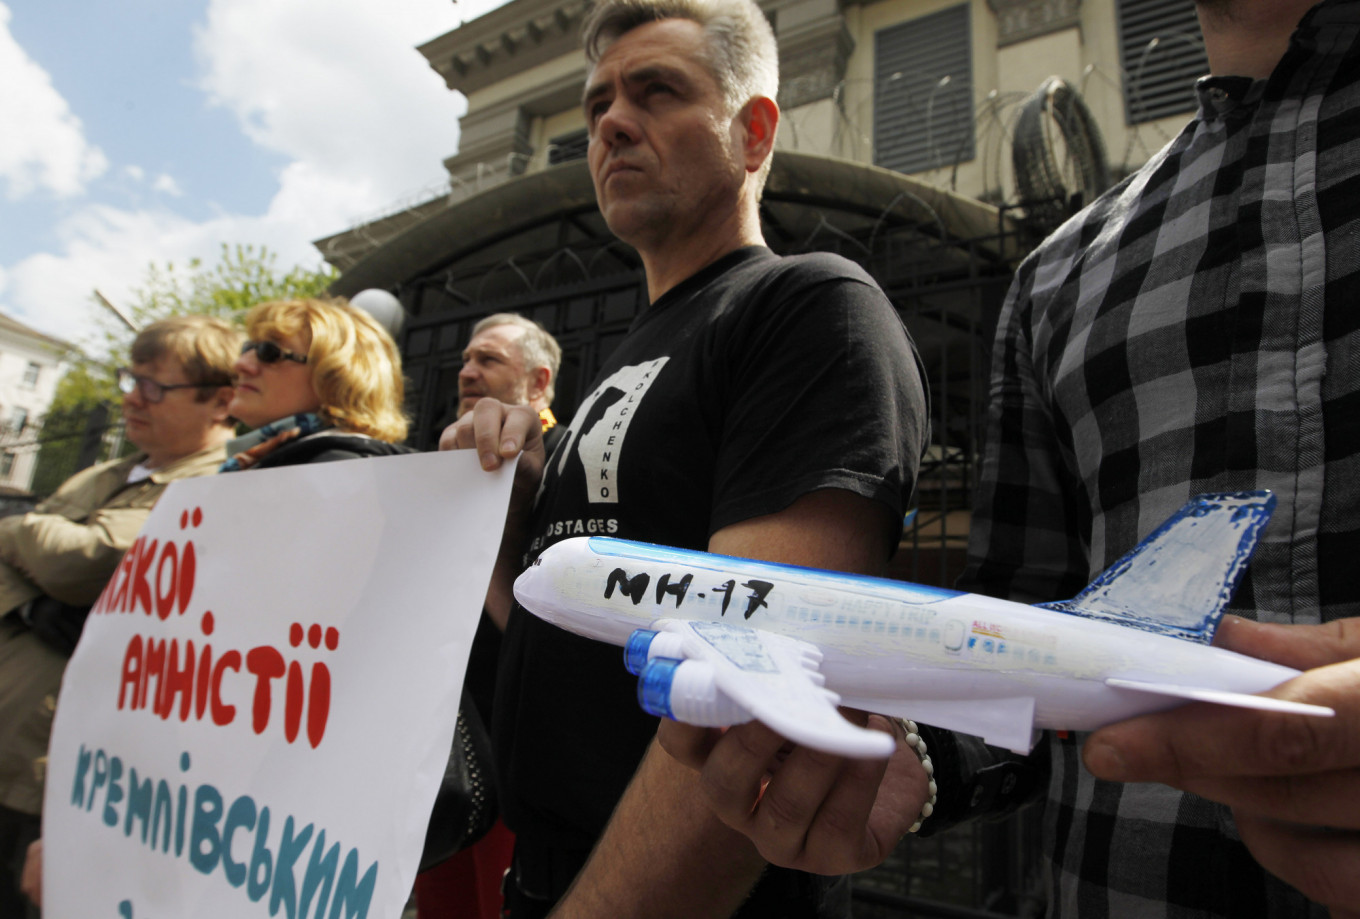 Dutch Military Almost Sent 1,000 Troops to MH17 Crash Site – Telegraaf